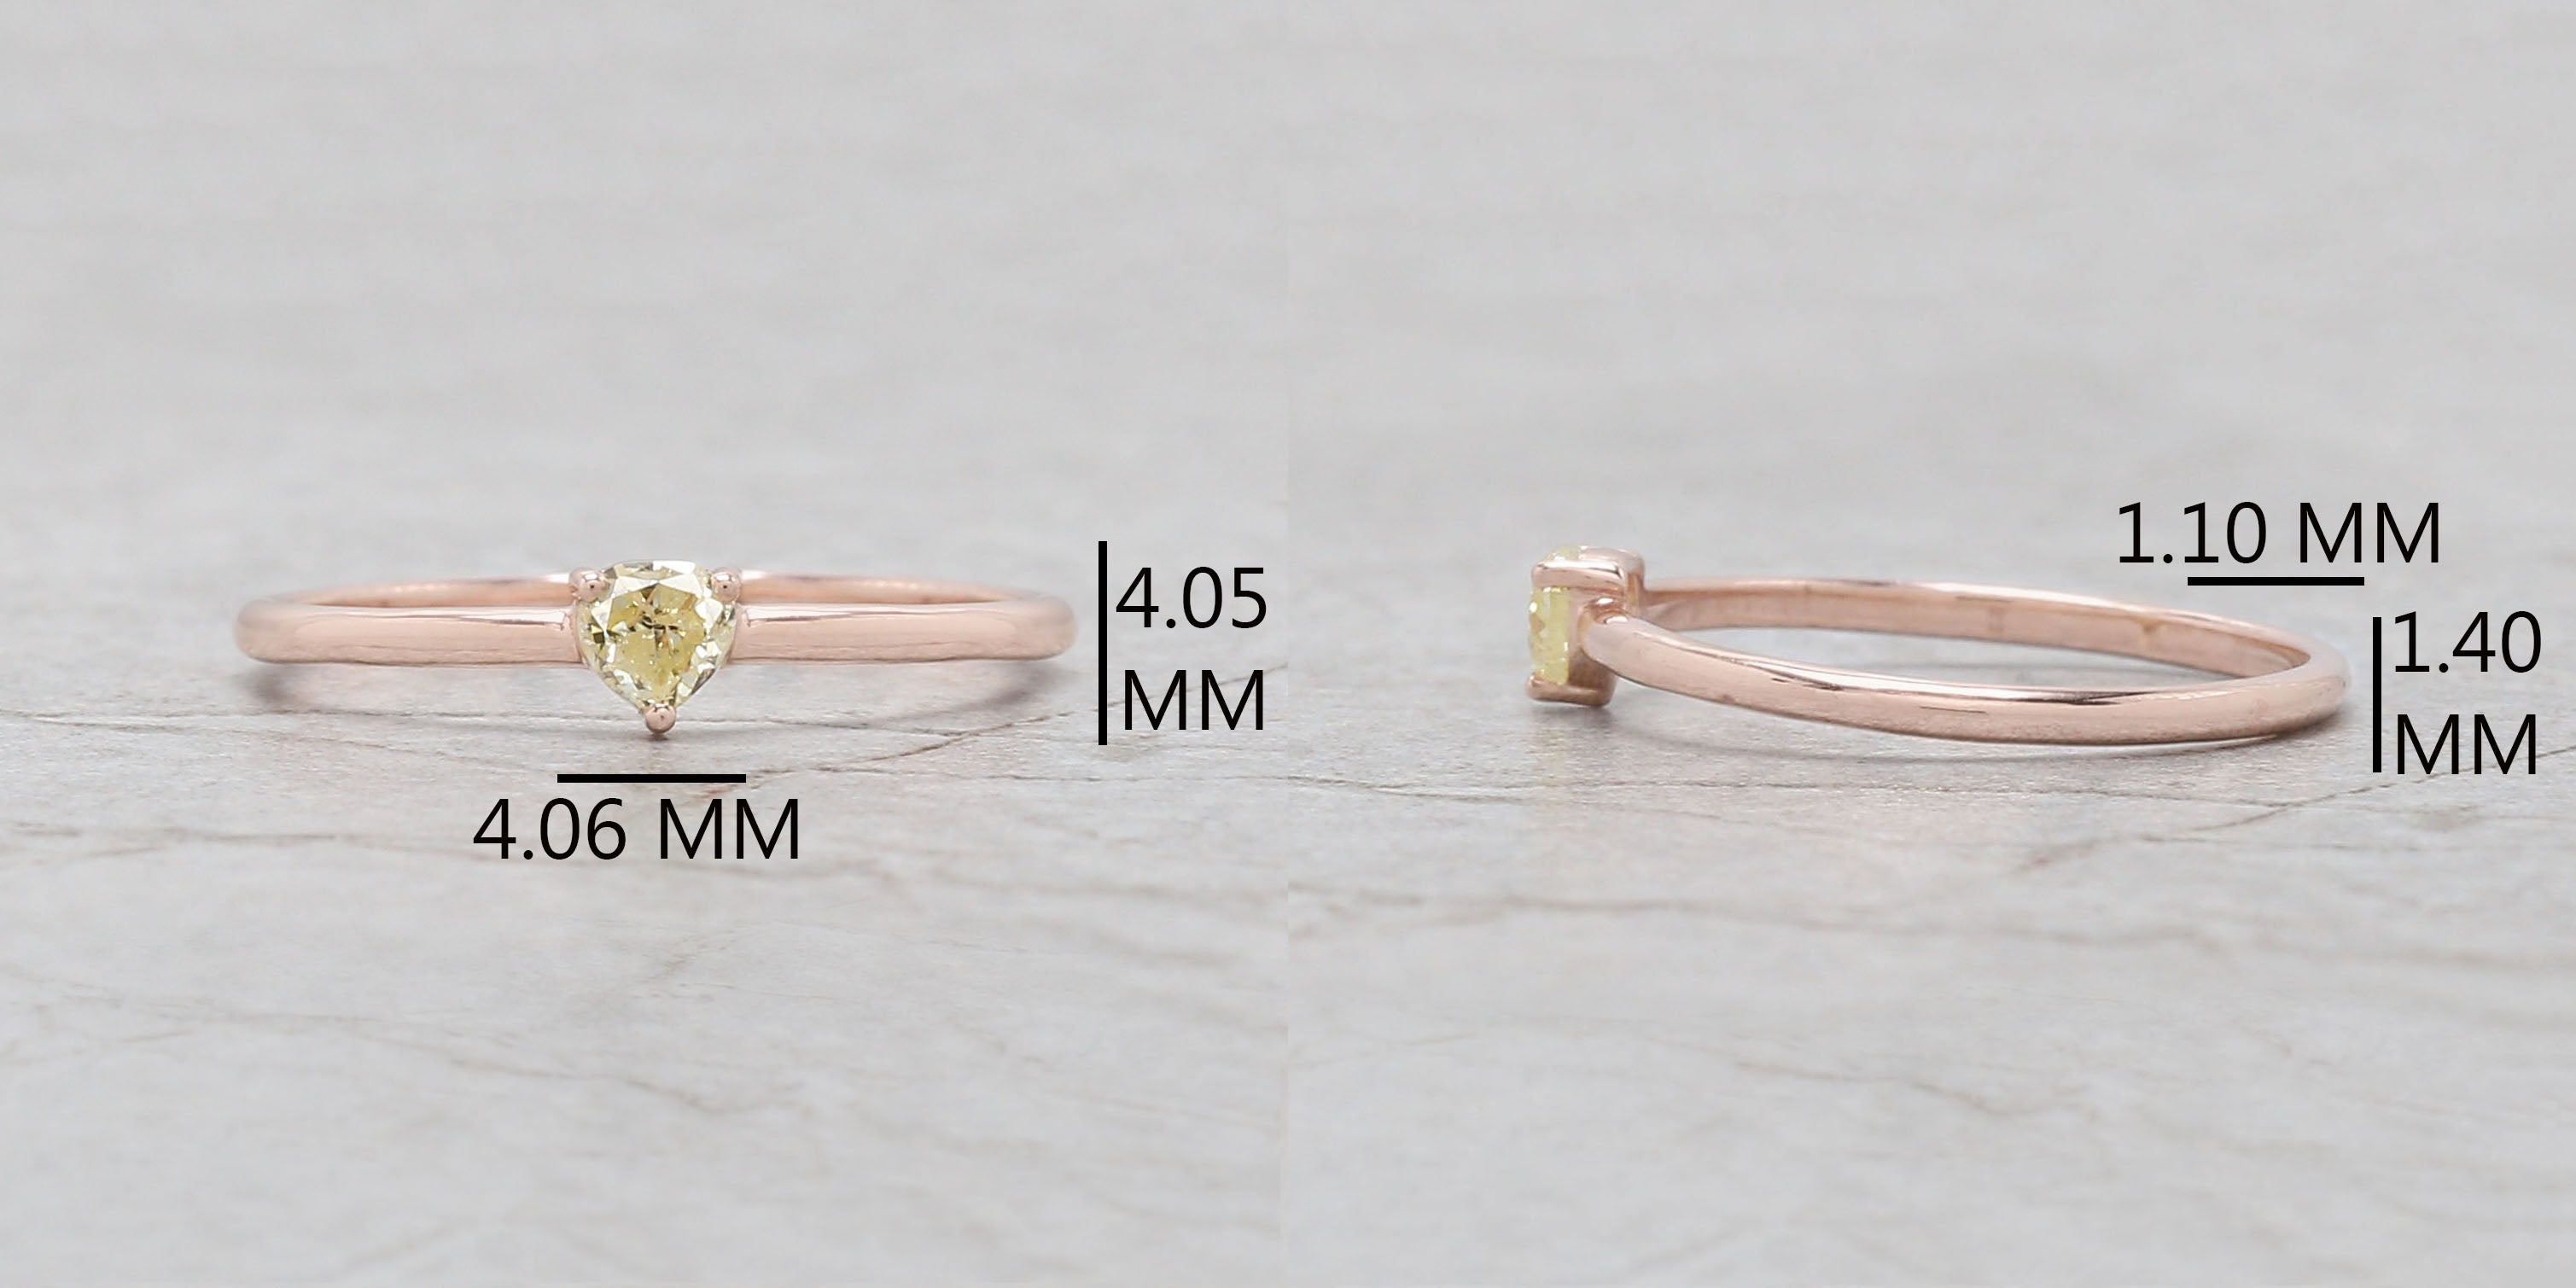 Heart Yellow Color Diamond Ring Engagement Wedding Gift Ring 14K Solid Rose White Yellow Gold Ring 0.19 CT KDN8175